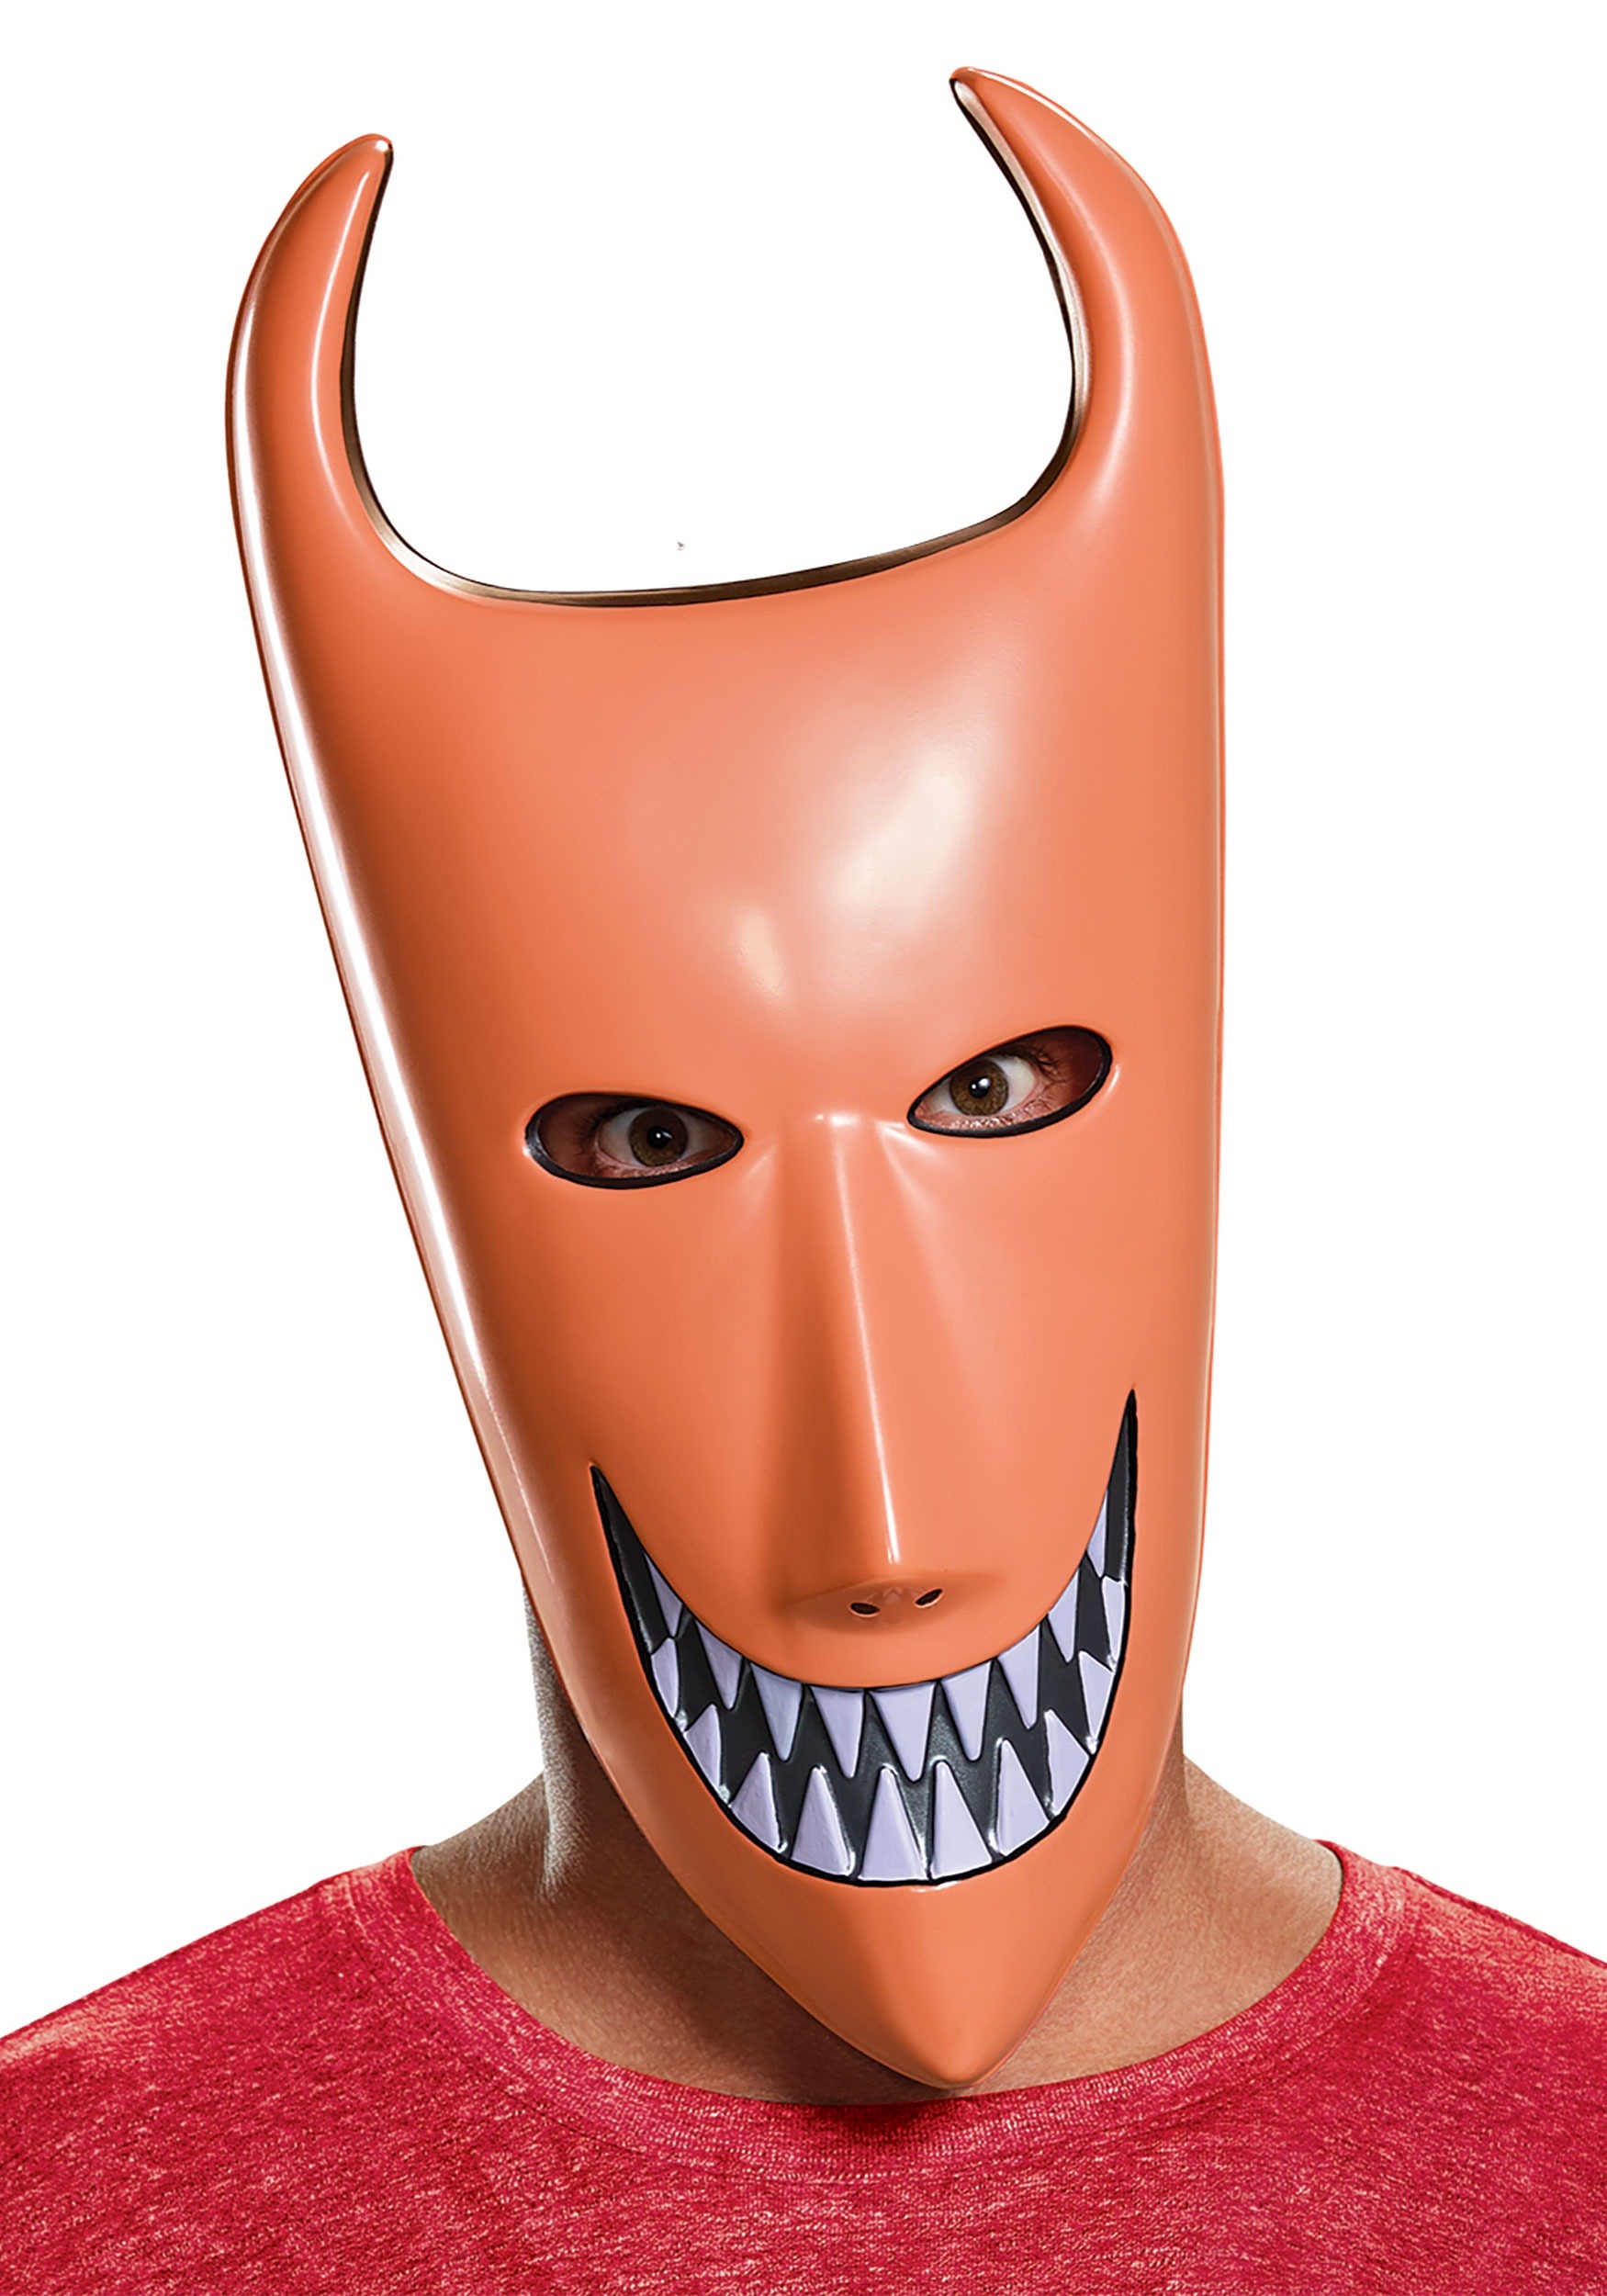 Photos - Fancy Dress Before Disguise Lock Mask from Nightmare  Christmas Black/Orange/Wh 